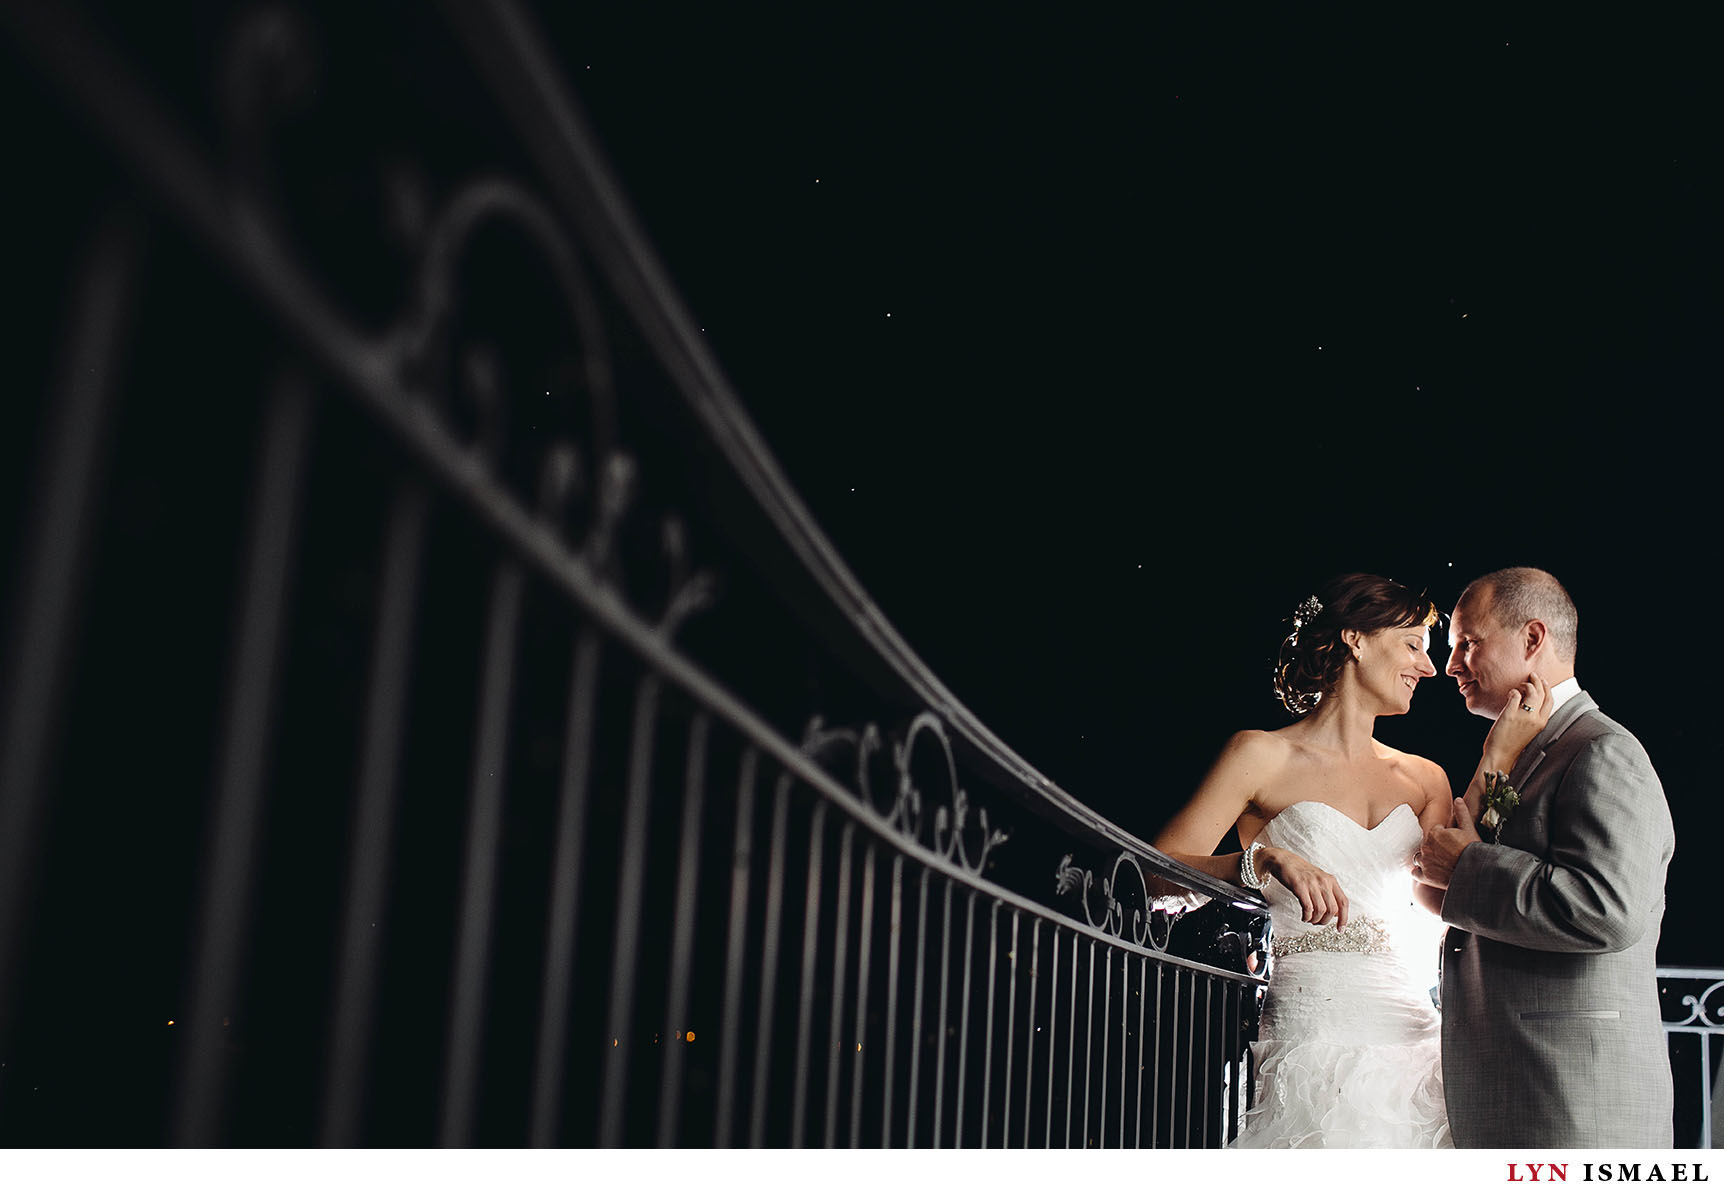 A night portrait of the bride and groom in Cambridge Mill by a creative wedding photographer.